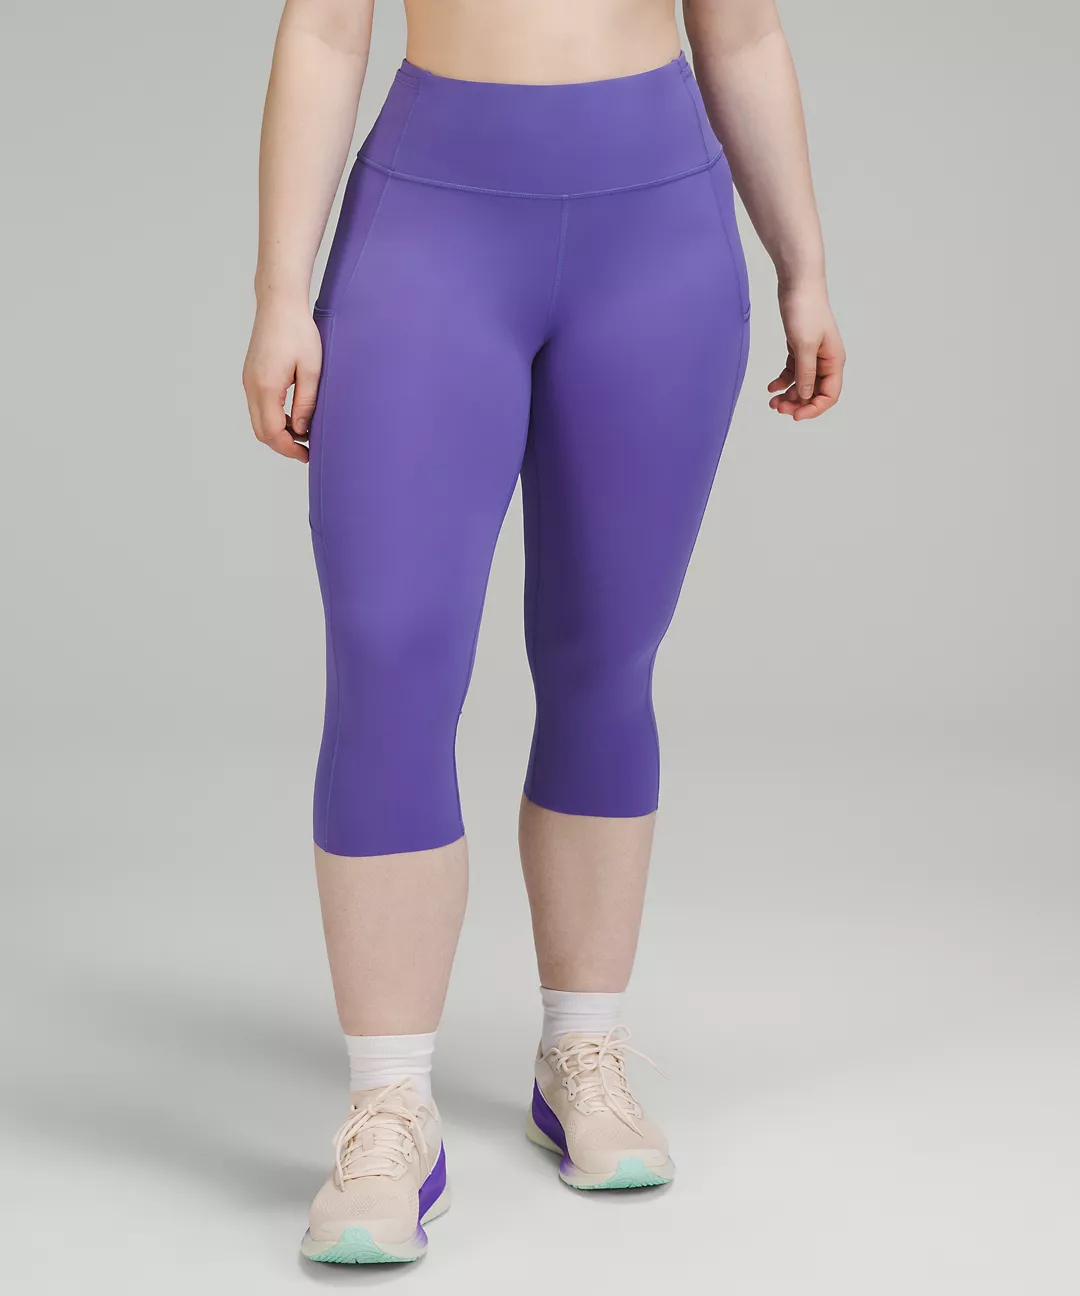 A lululemon Fast and Free High-Rise Crop 19"